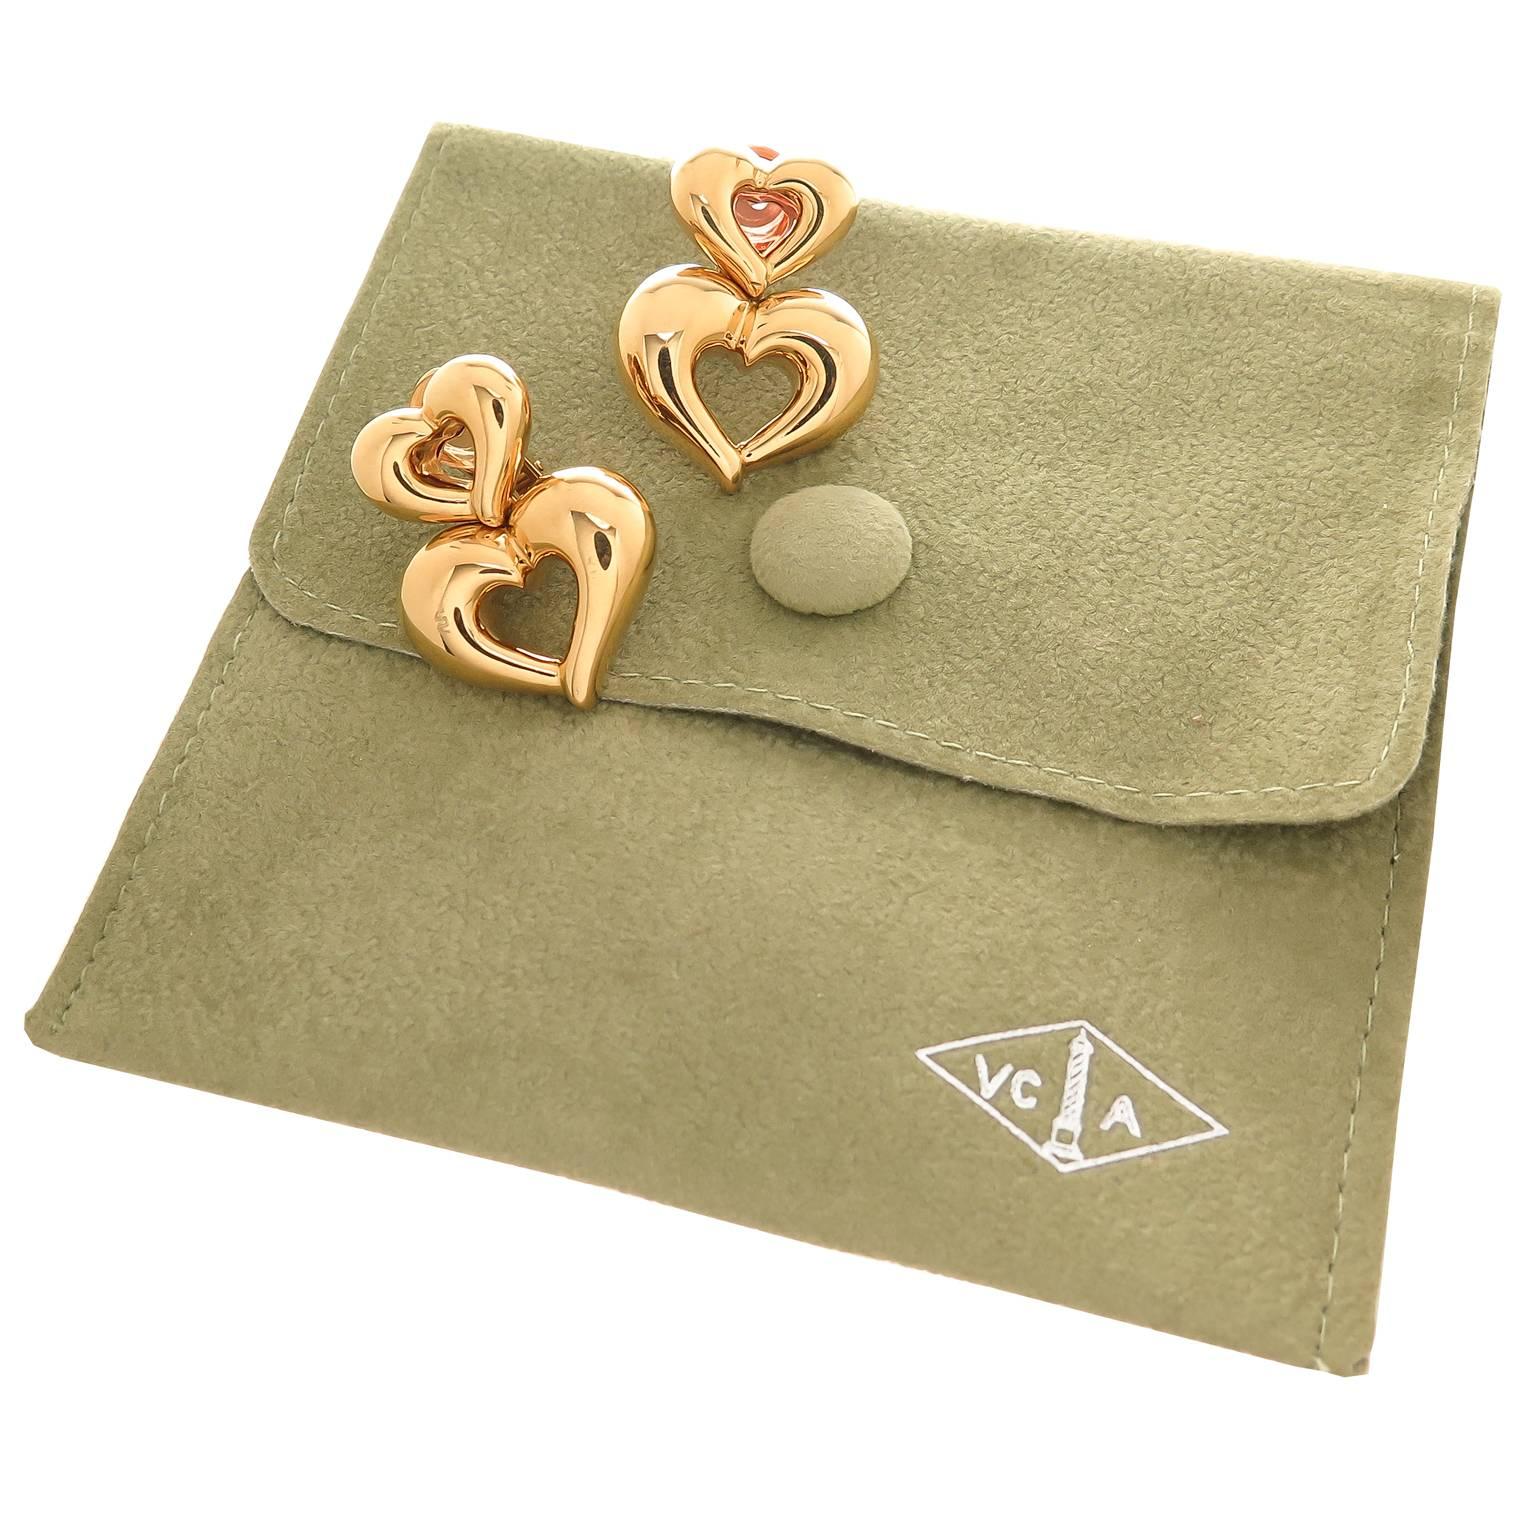 Circa 2005 Van Cleef and Arpels 18K yellow Gold Double Heart Earrings, measuring 1 1/8 inch in length and 7/8 inch wide. Having Clip backs to which a post can be easily added if desired. Come in Original VCA suede pouch.